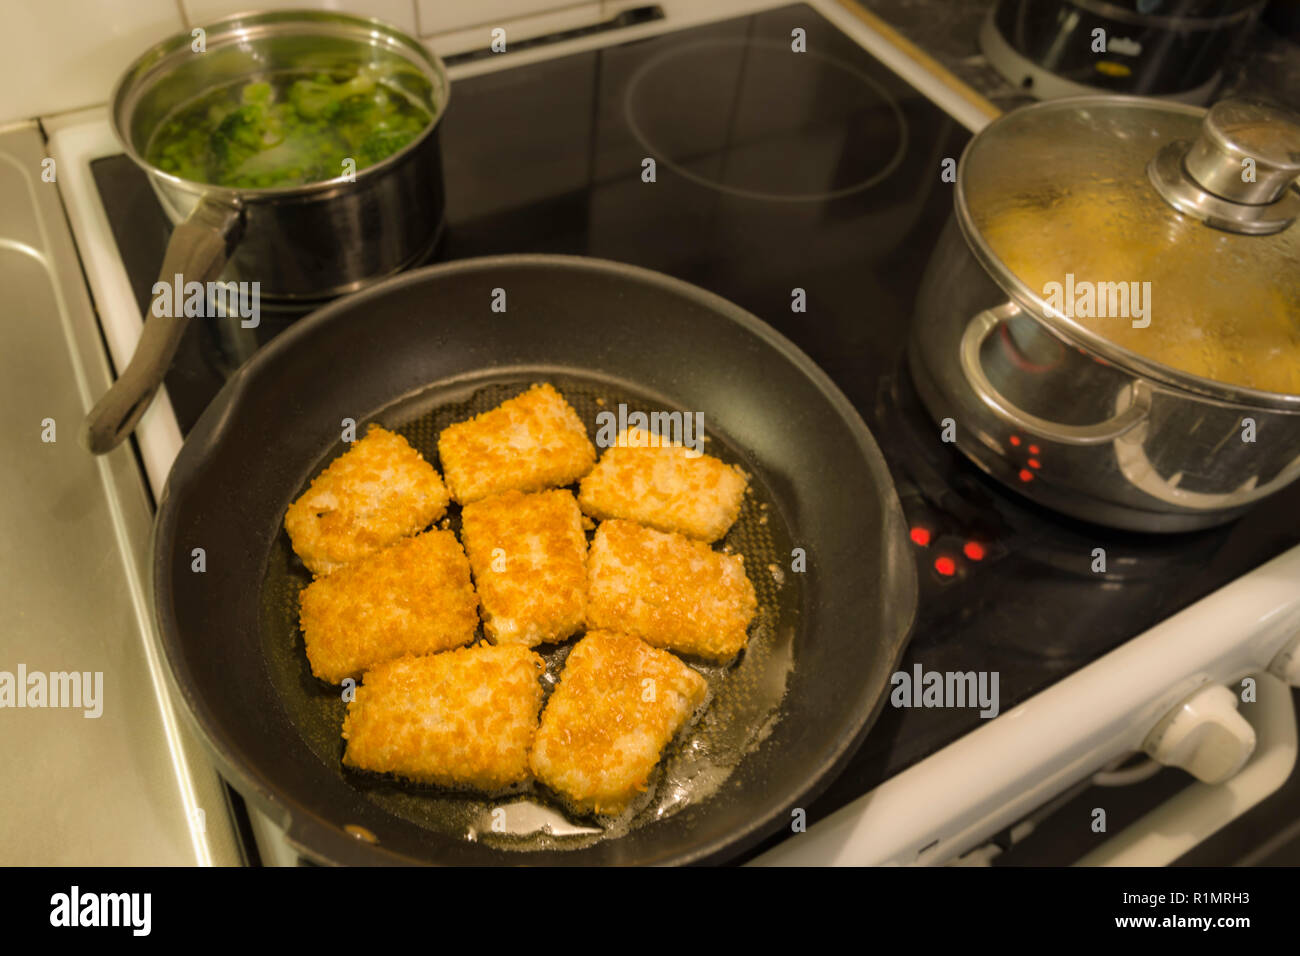 Breaded fish fillets sizzling in frying pan Stock Photo